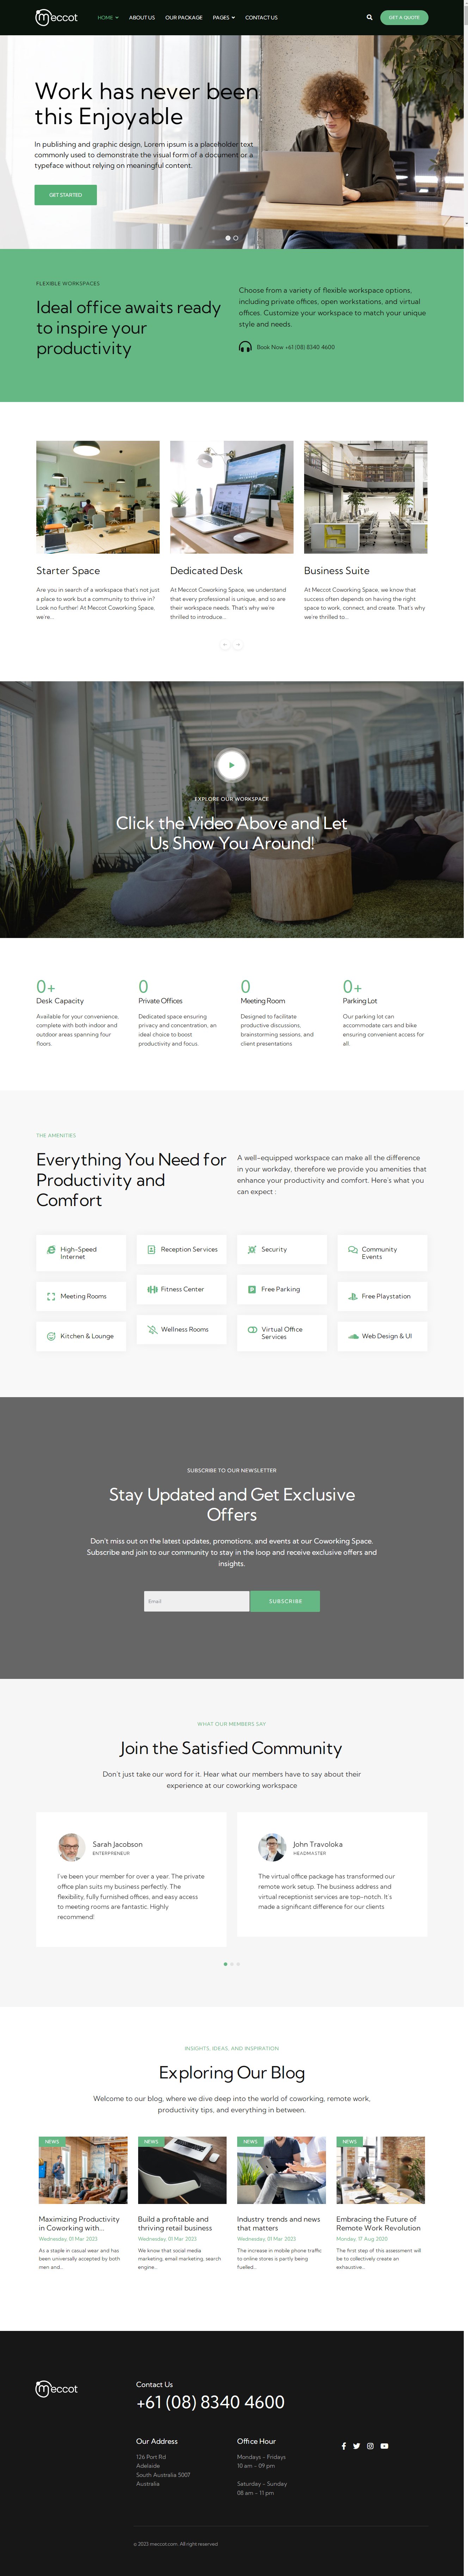 Meccot - Dynamic Coworking Space Joomla 4 Template